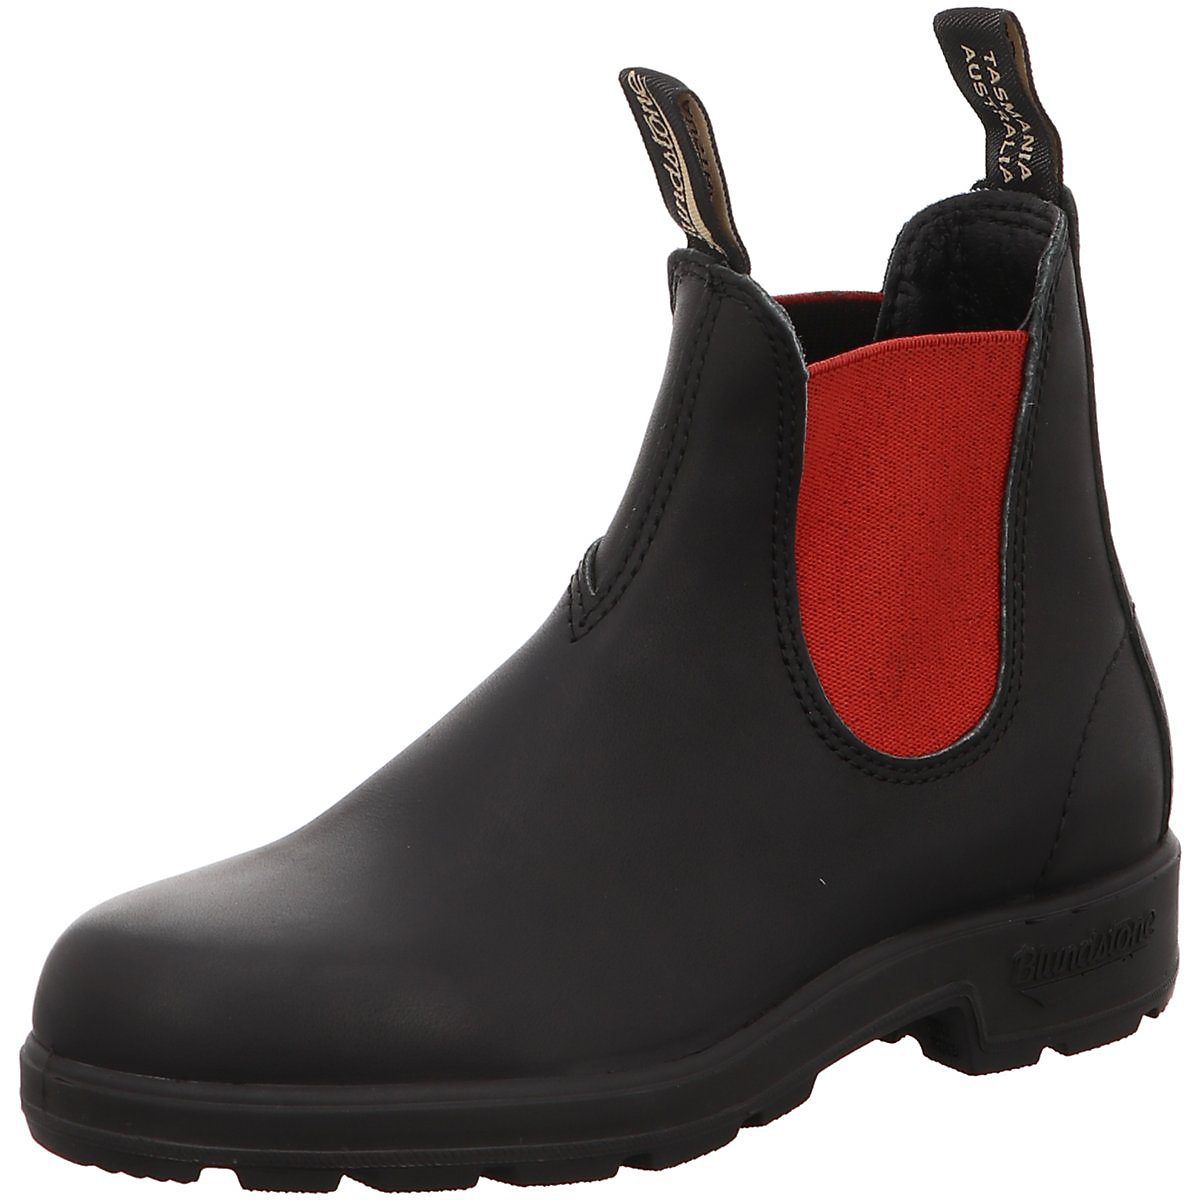 Blundstone 508 Voltan Black Leather With Red Elastic (550 Series) Chelsea Boots schwarz/rot